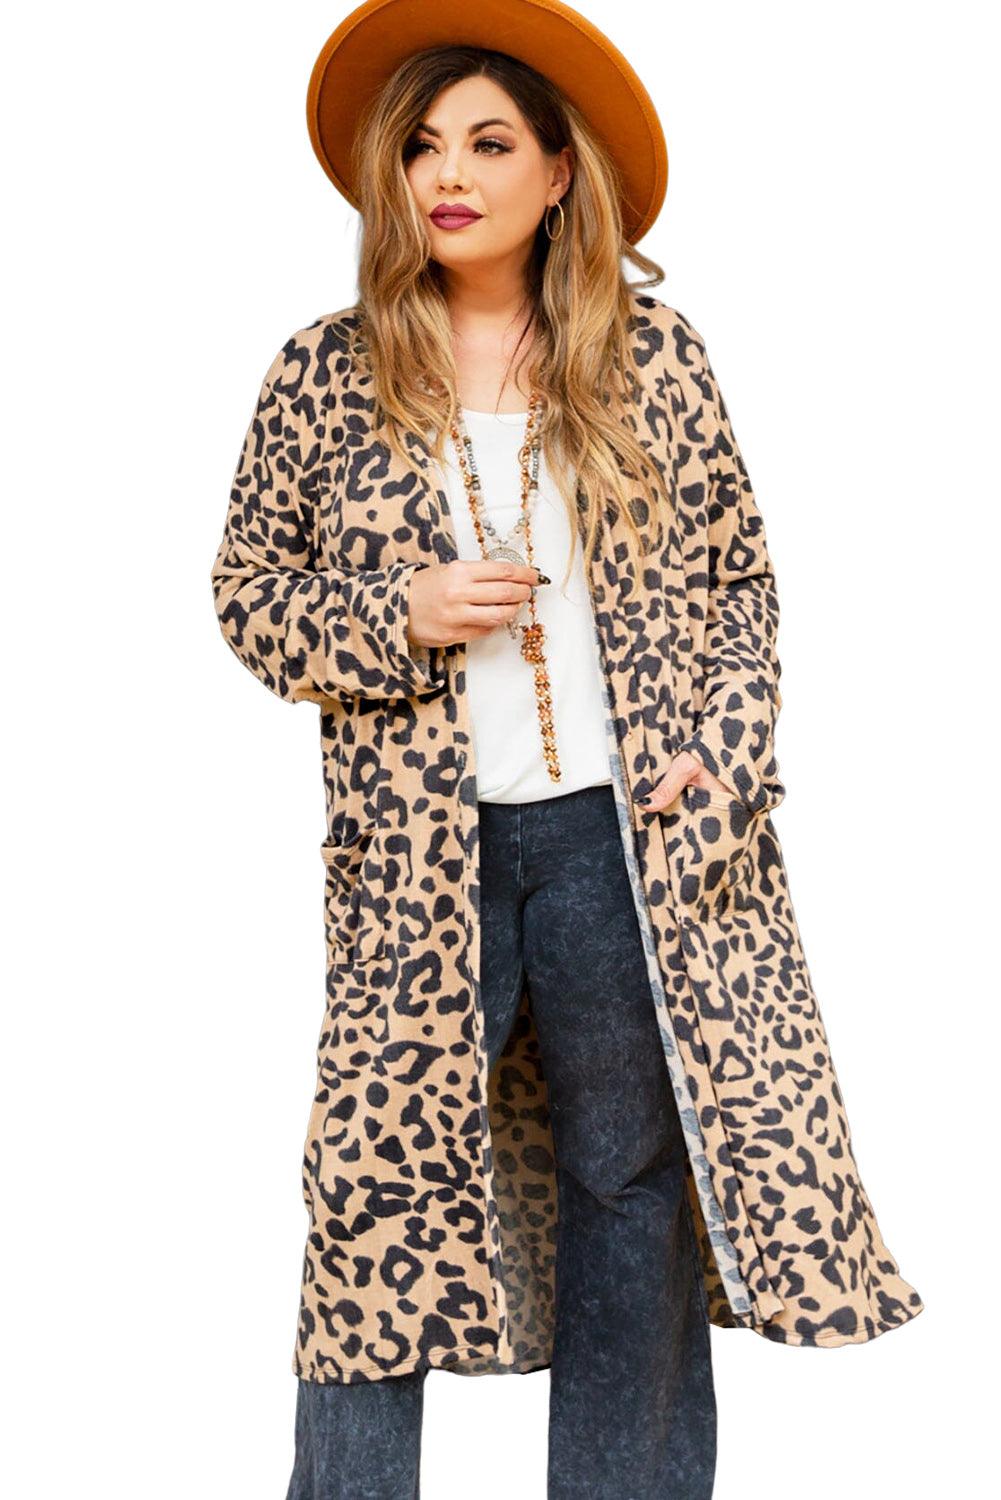 Leopard Plus Size Open Front Pocketed Long Cardigan - L & M Kee, LLC